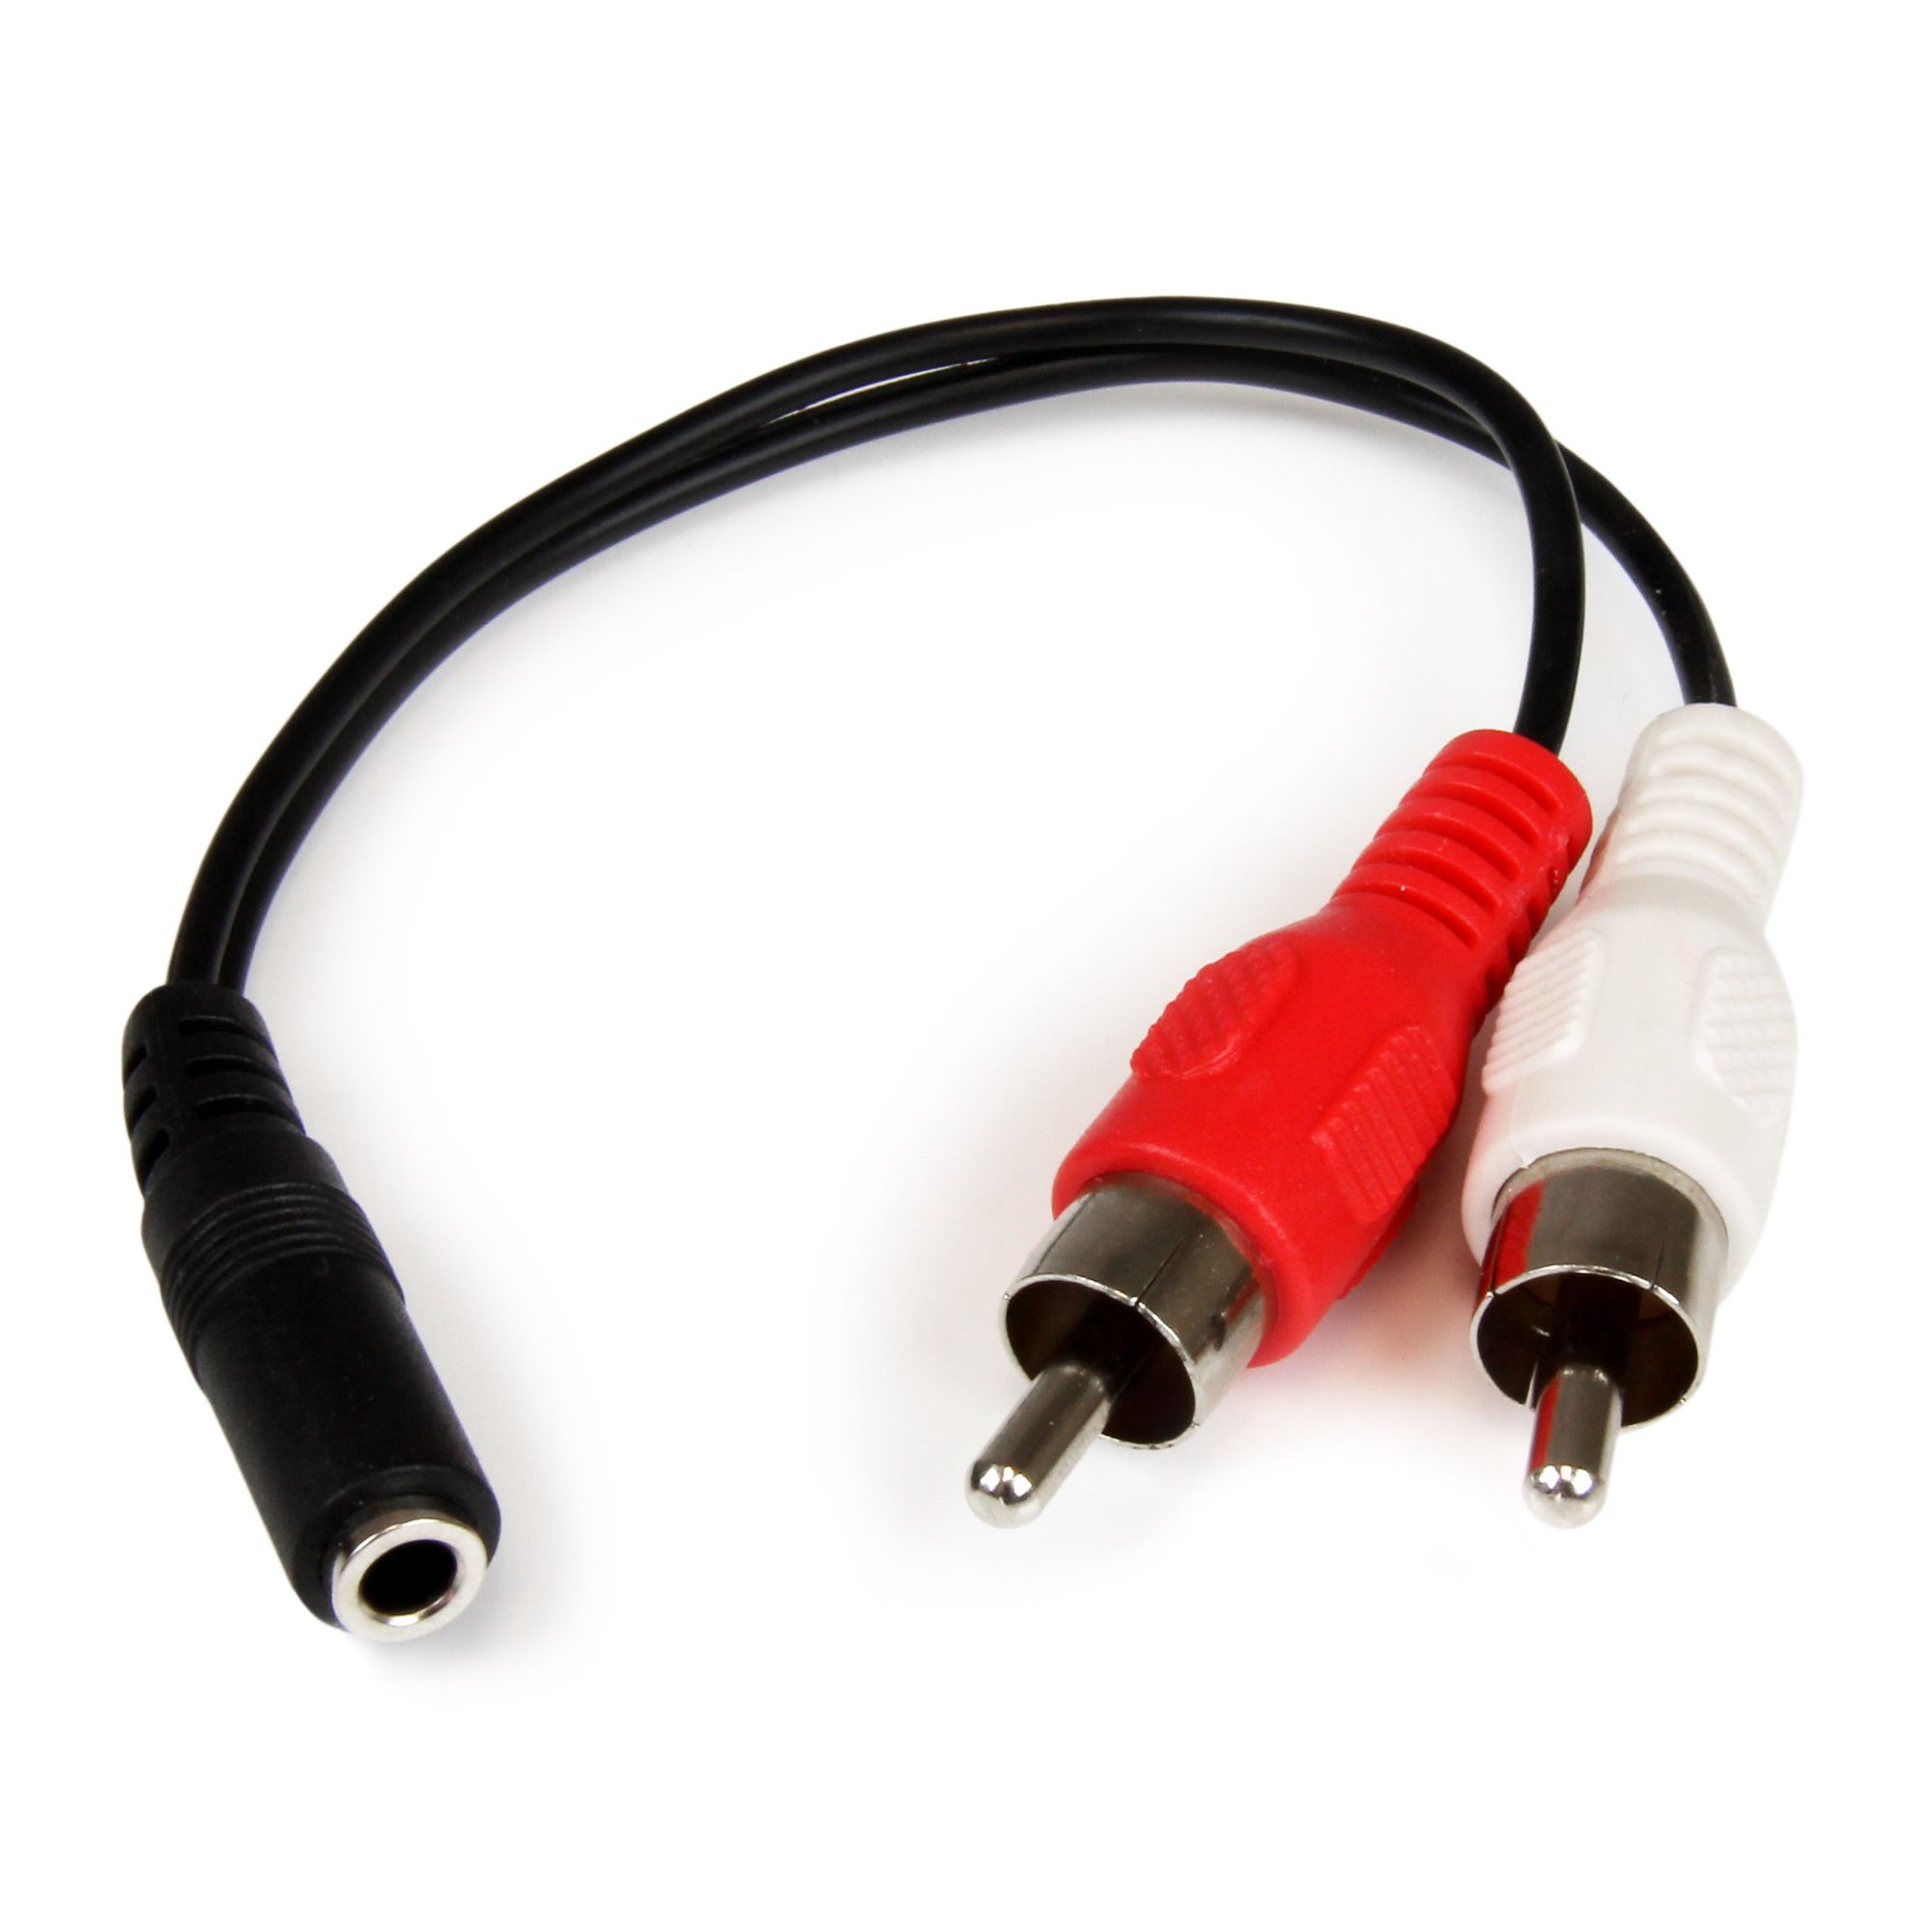 【MUFMRCA】6IN STEREO AUDIO CABLE - 3.5MM F